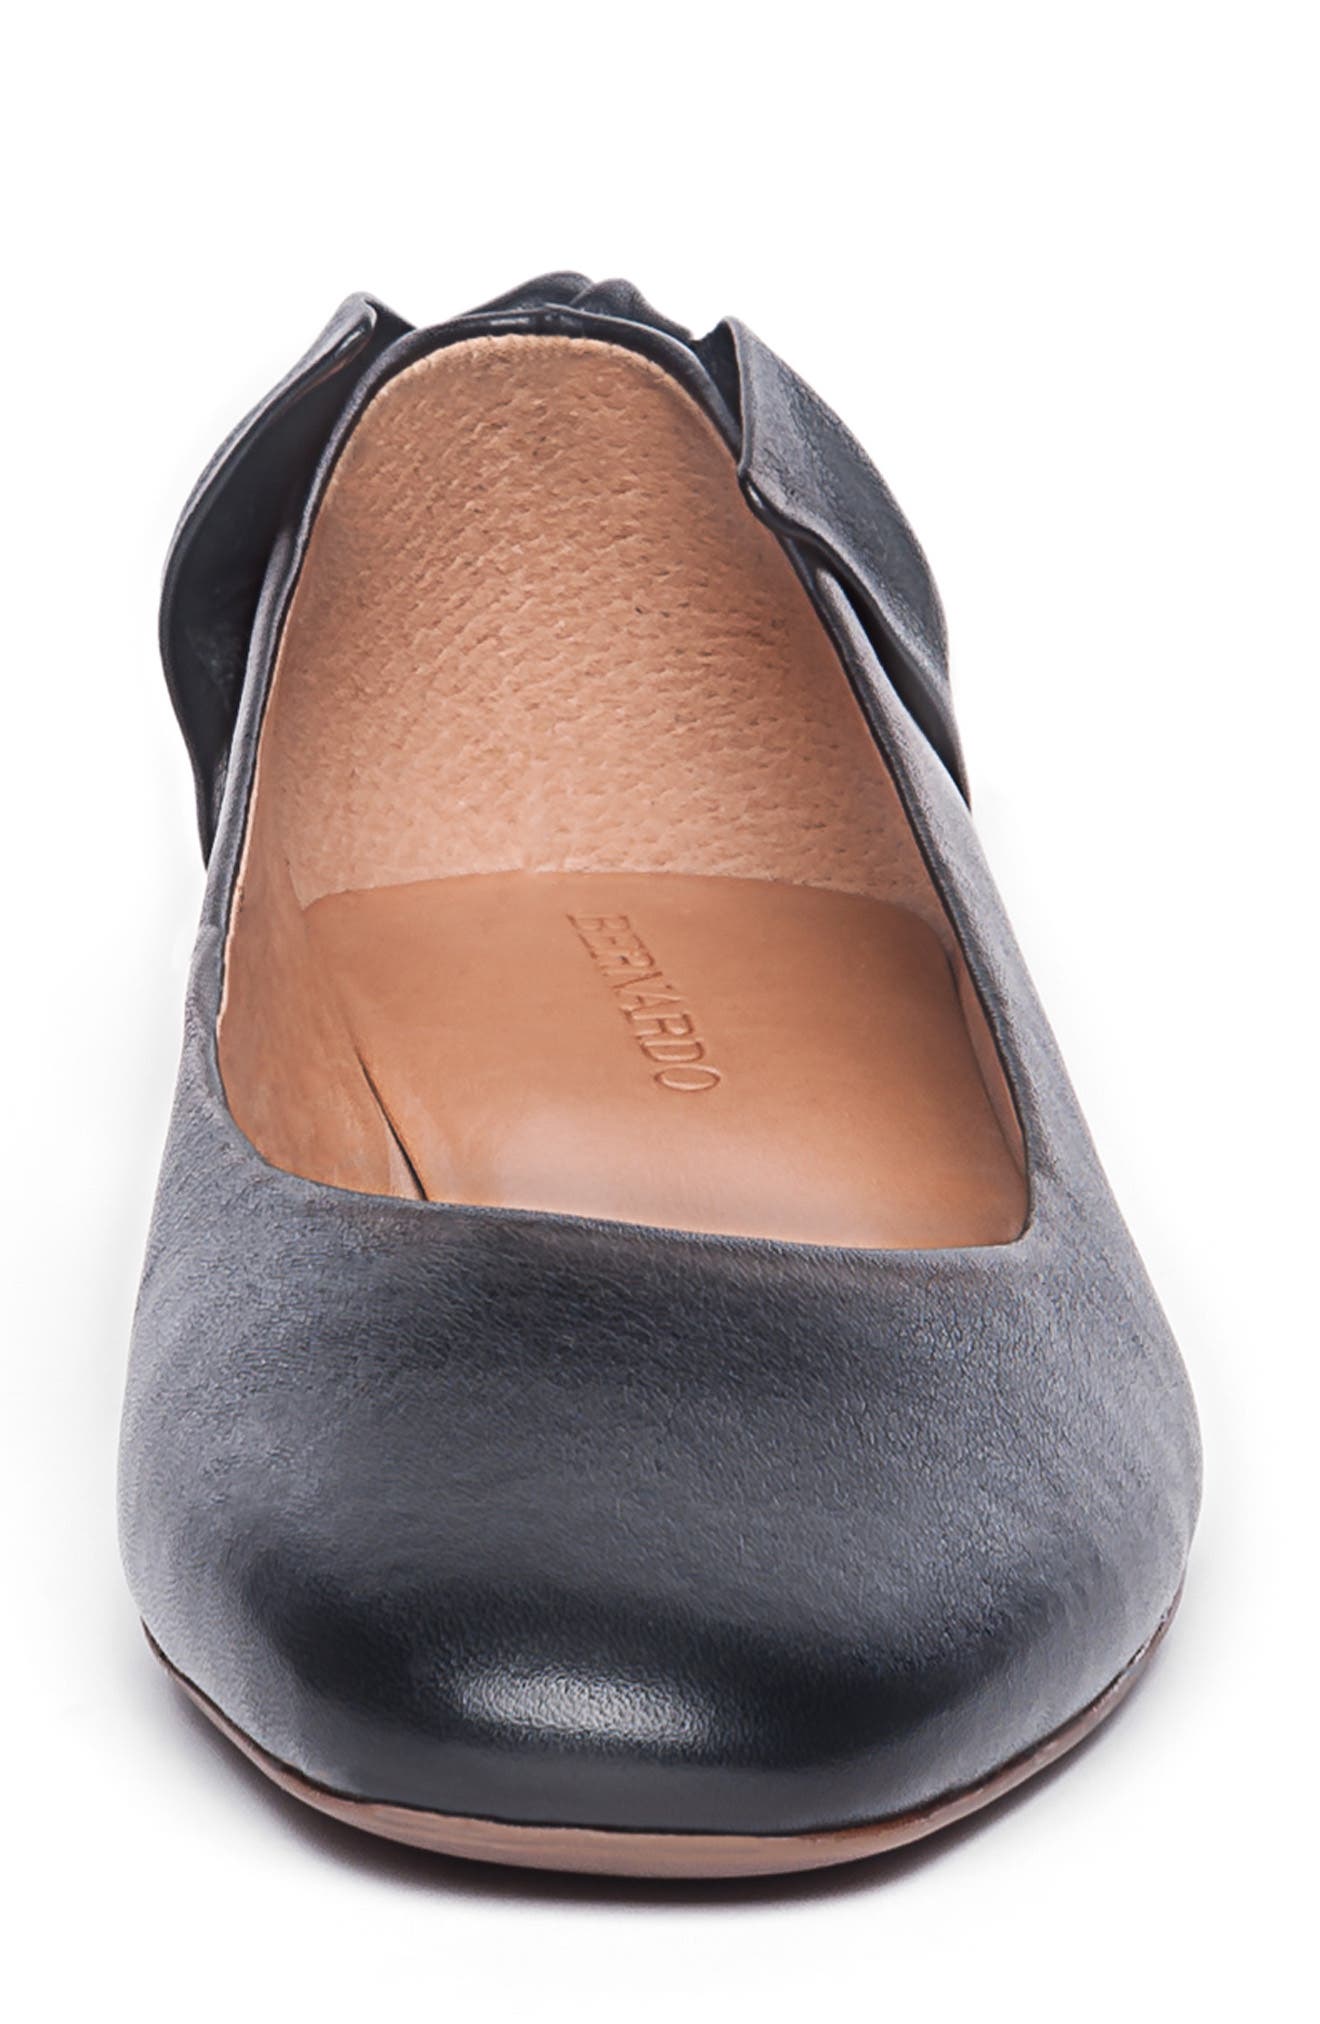 NEW BORN Women's Size 7 Brown Leather Bow-Tie Ballet Flats 